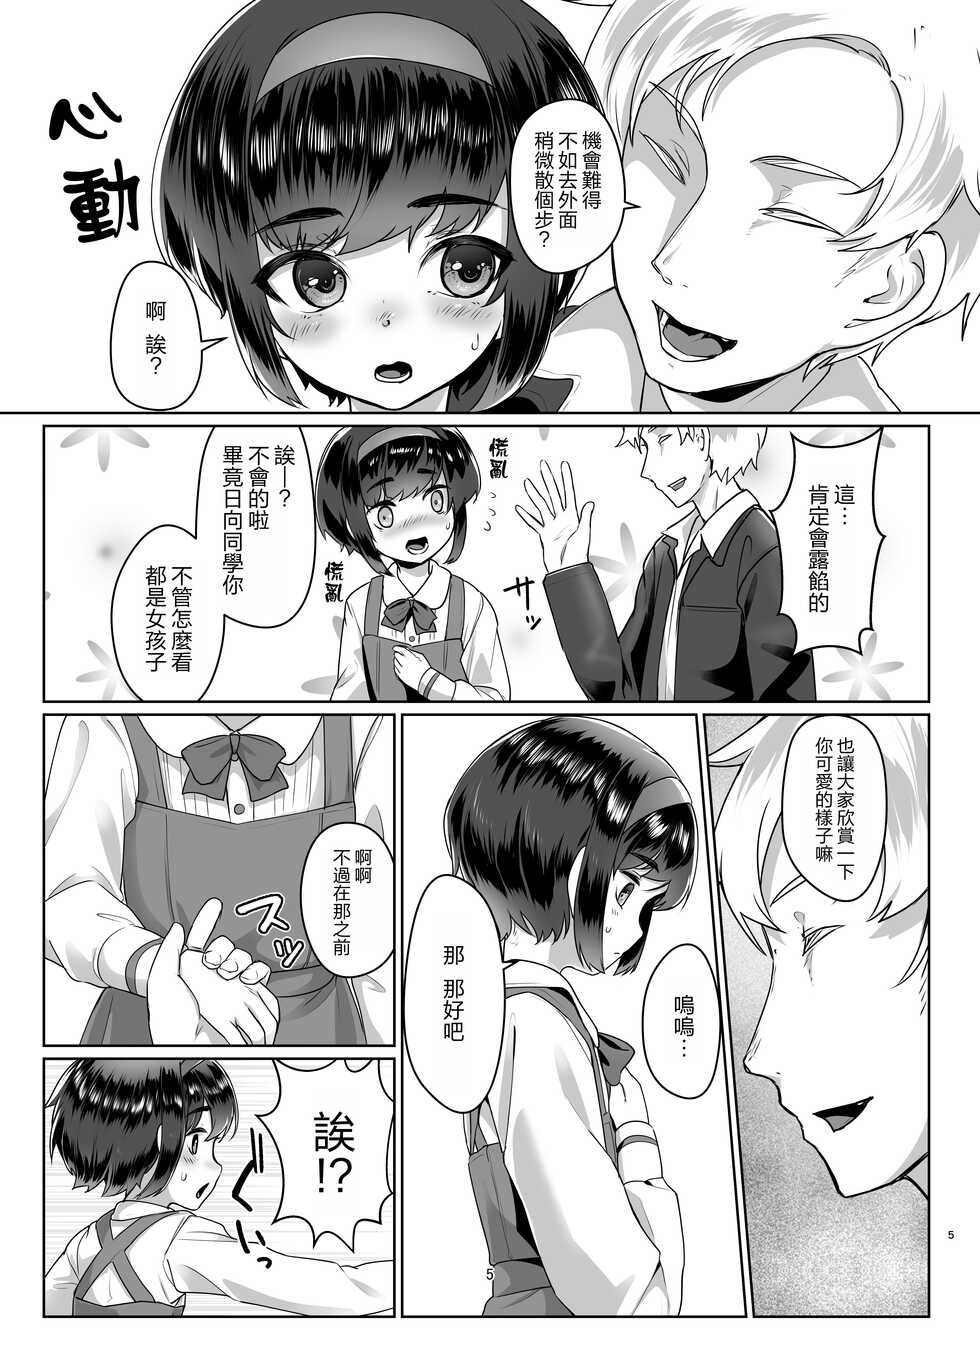 [face to face (ryoattoryo)] Tooi Hinata 2 [Chinese] [AX個人漢化] [Digital] - Page 5